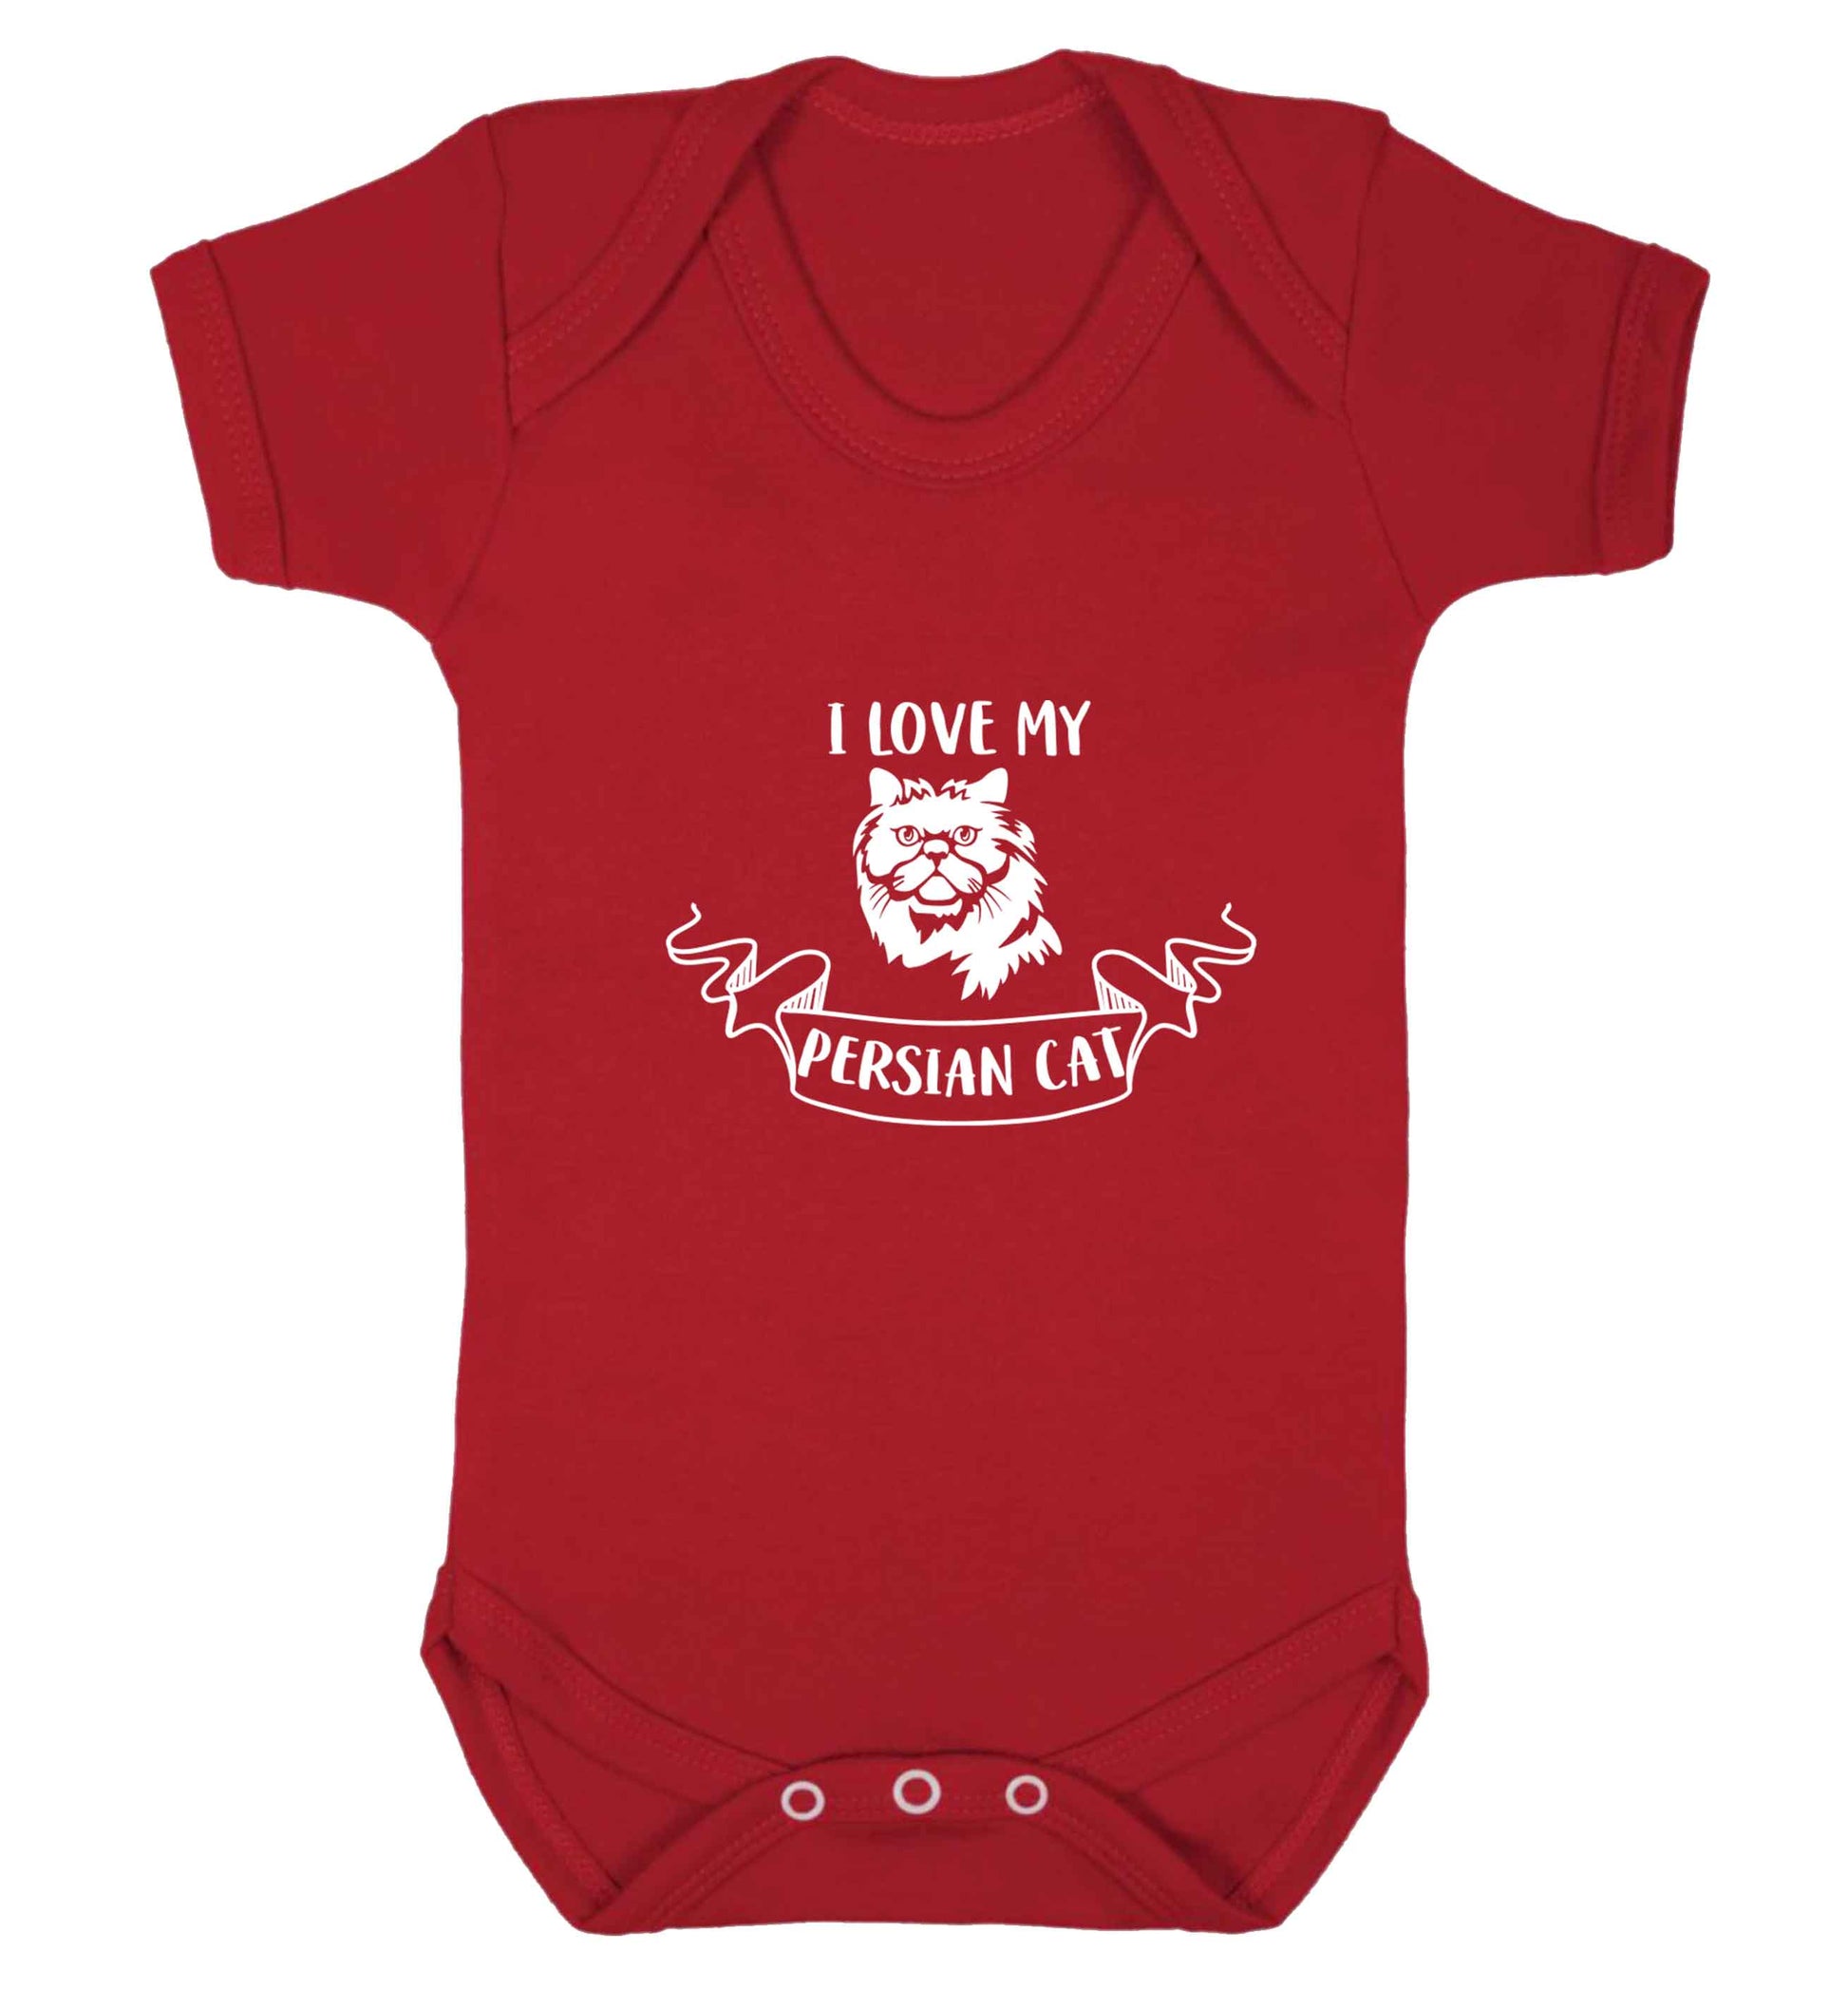 I love my persian cat baby vest red 18-24 months